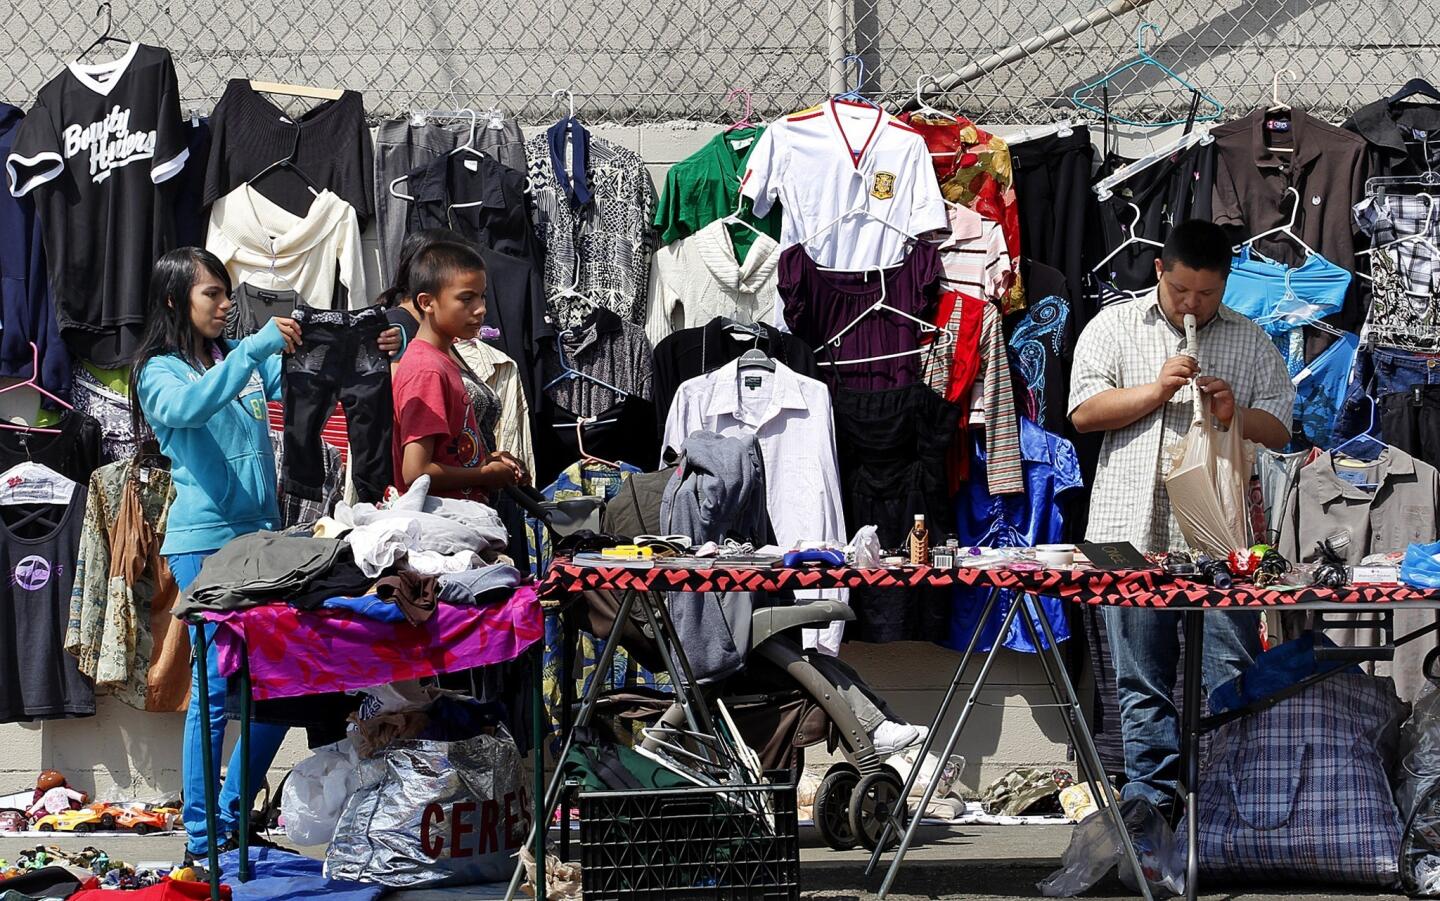 Shoppers check out items for sale in a Watts neighborhood. A proliferation of unlicensed street vending and people illegally selling used items out of their homes or at informal open-air markets are becoming neighborhood nuisances -- and worse, according to some officials.